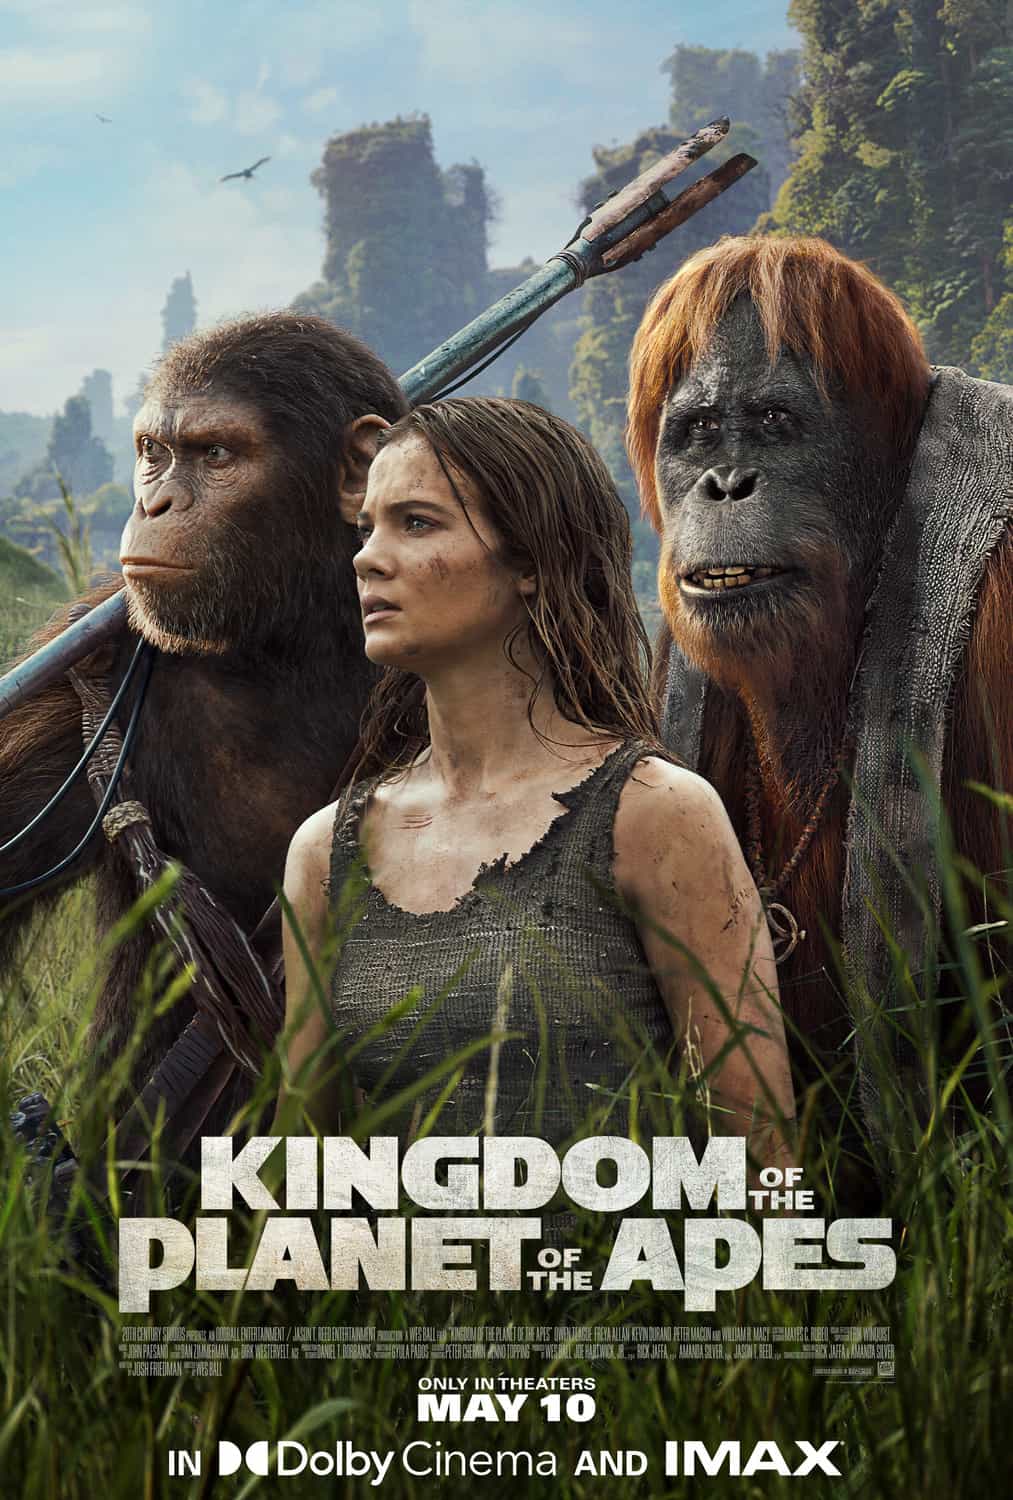 Global Box Office Weekend Report 17th - 19th May 2024:  Kingdom of the Planet of the Apes remains at the top of the global box office with The Strangers: Chapter 1 coming in at number 4